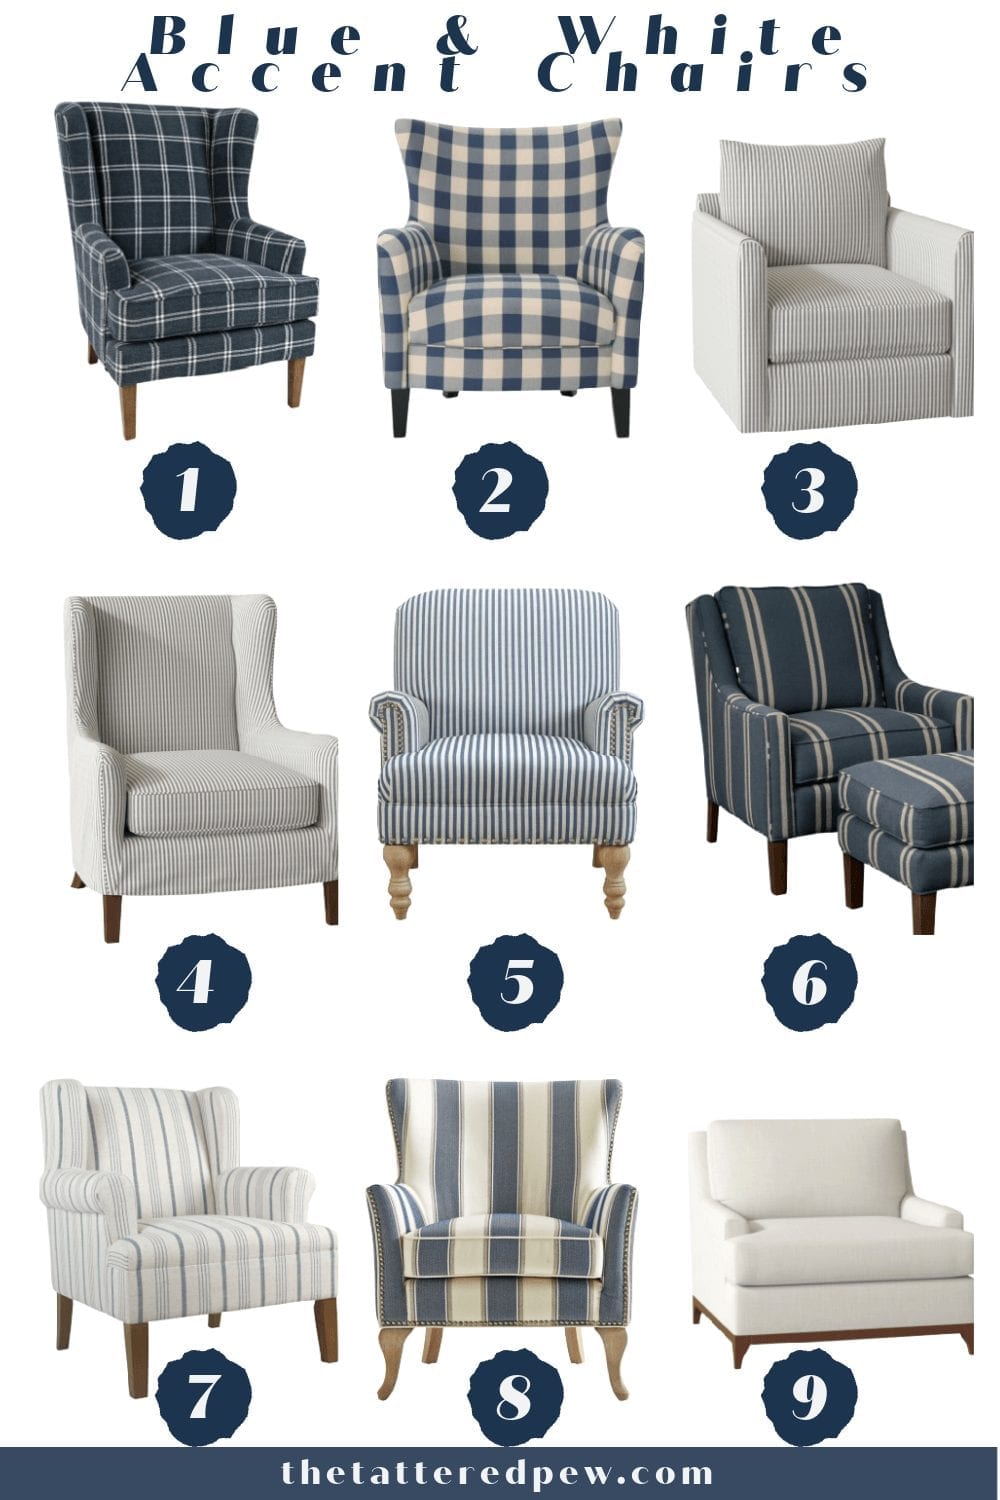 Check out these 9 blue and white accents chairs all from Wayfair!